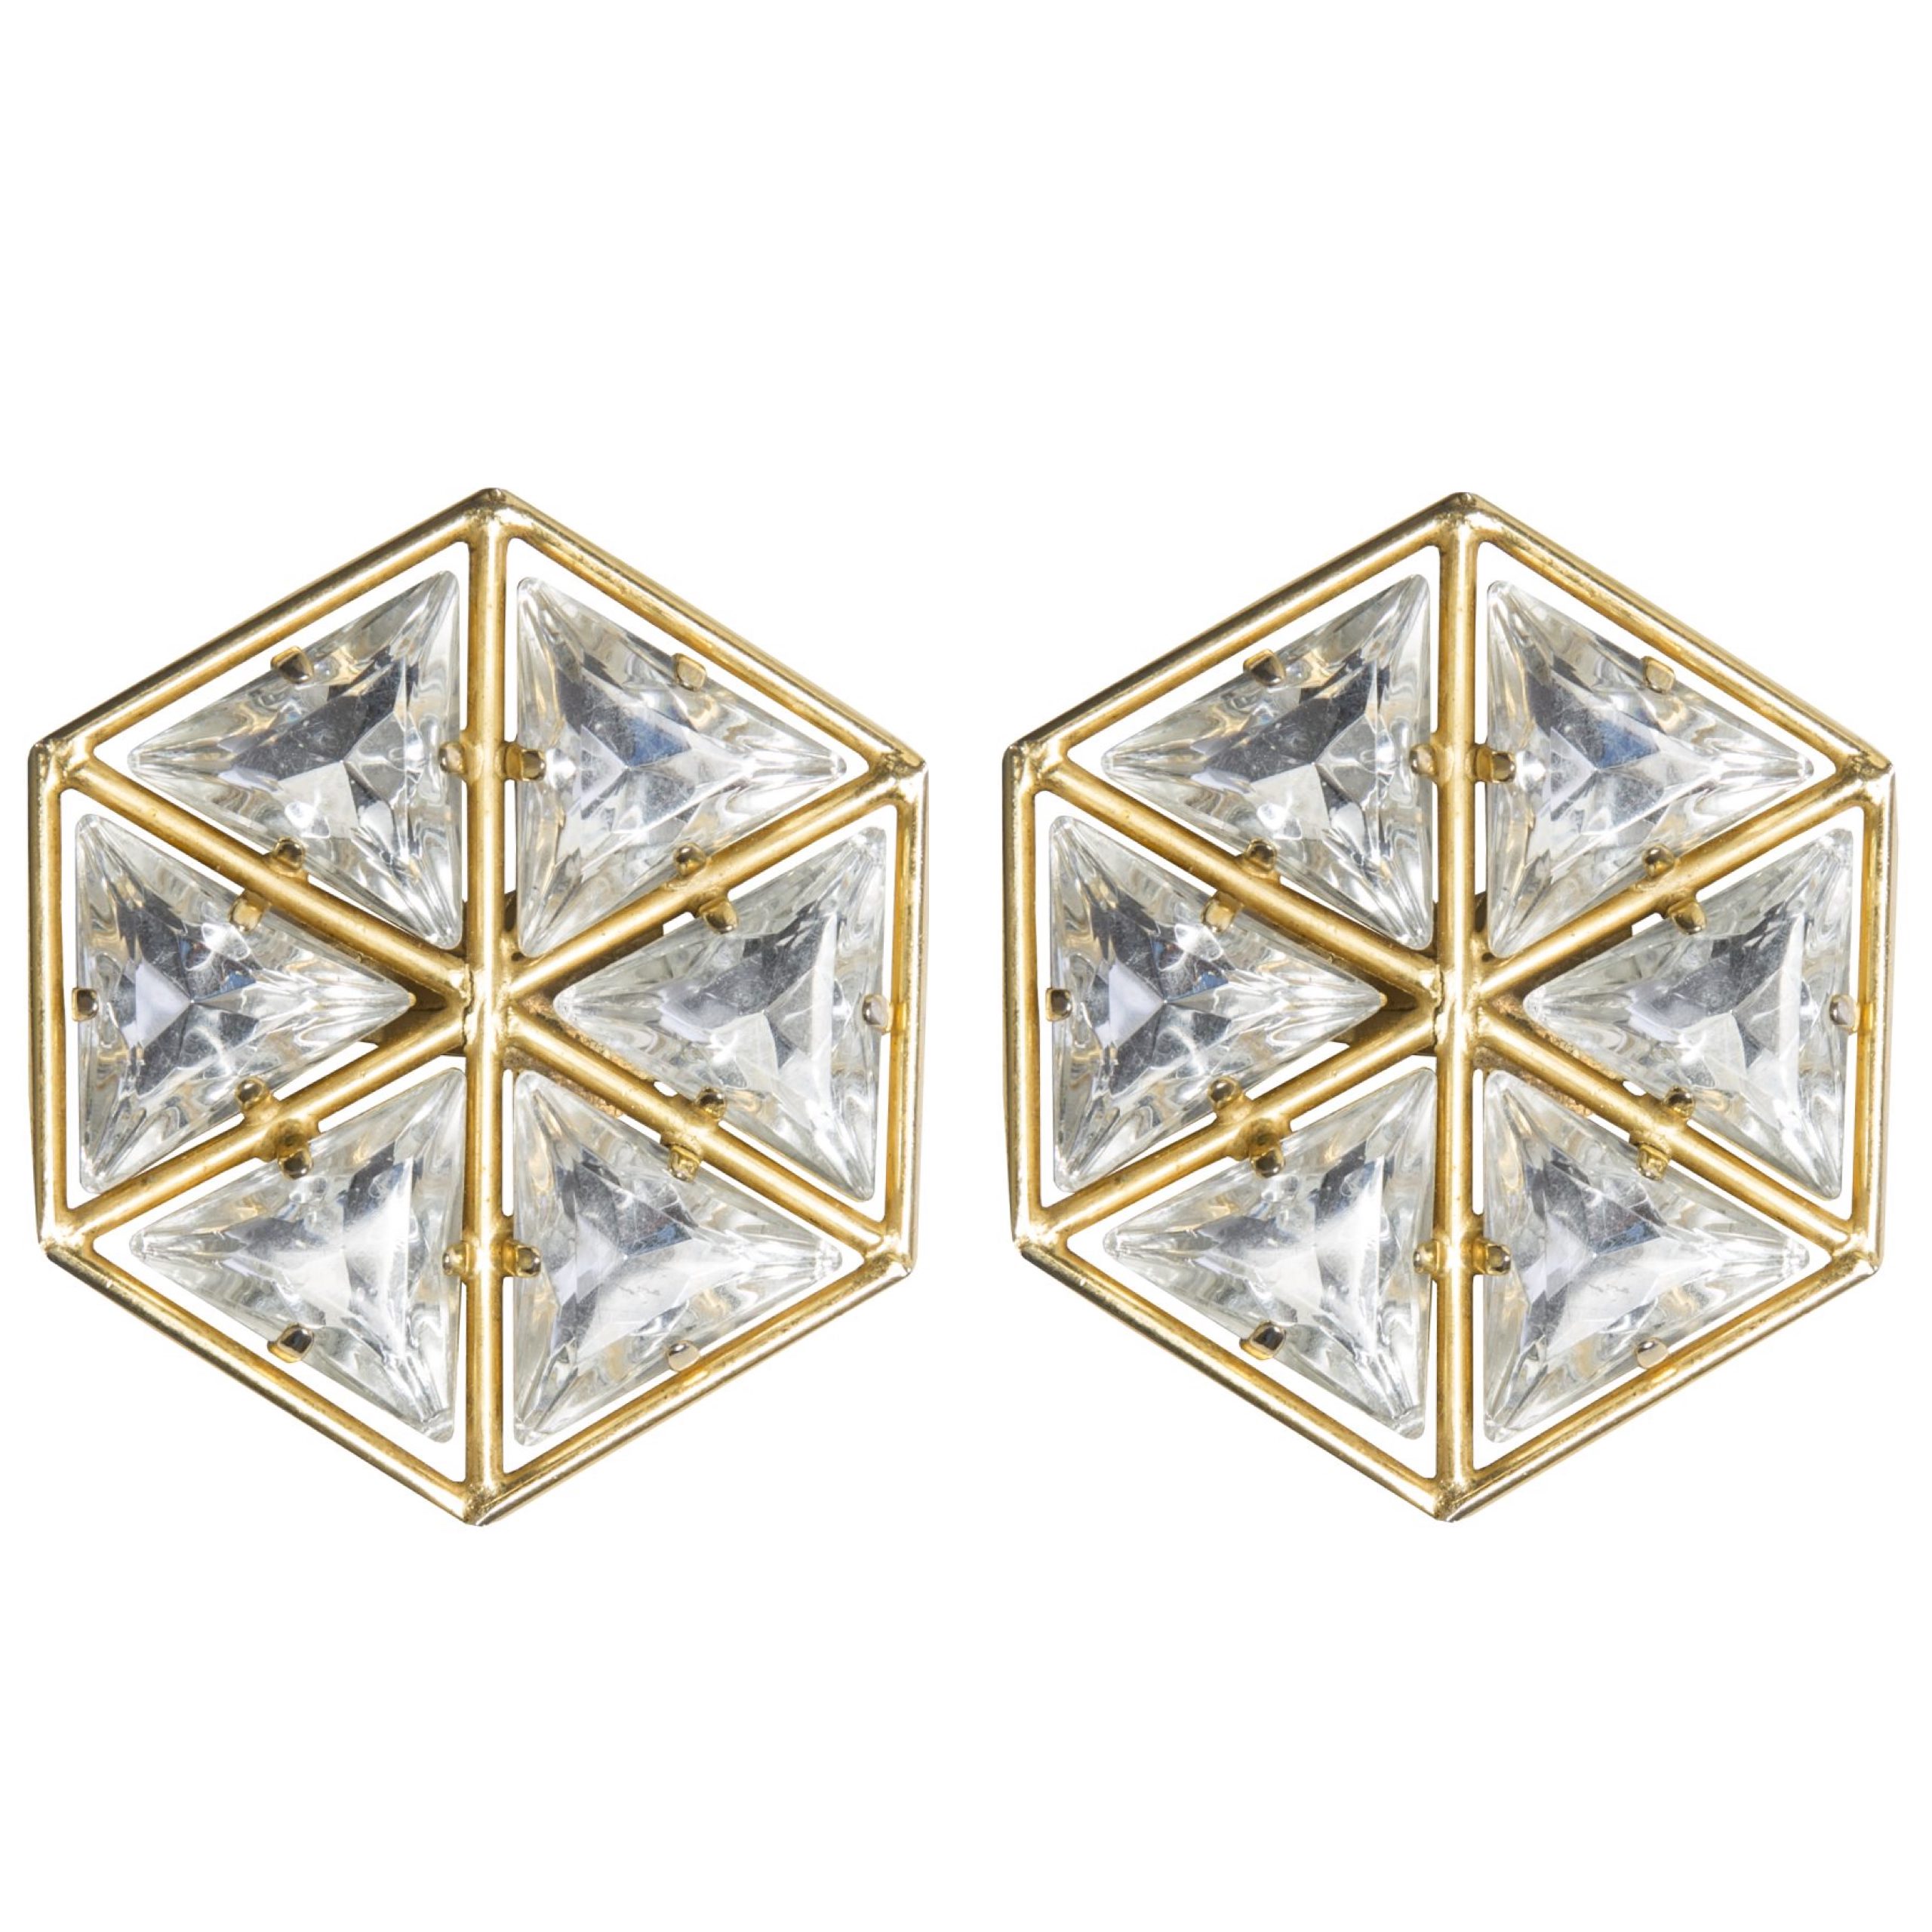 Vintage haute couture spectacular earrings